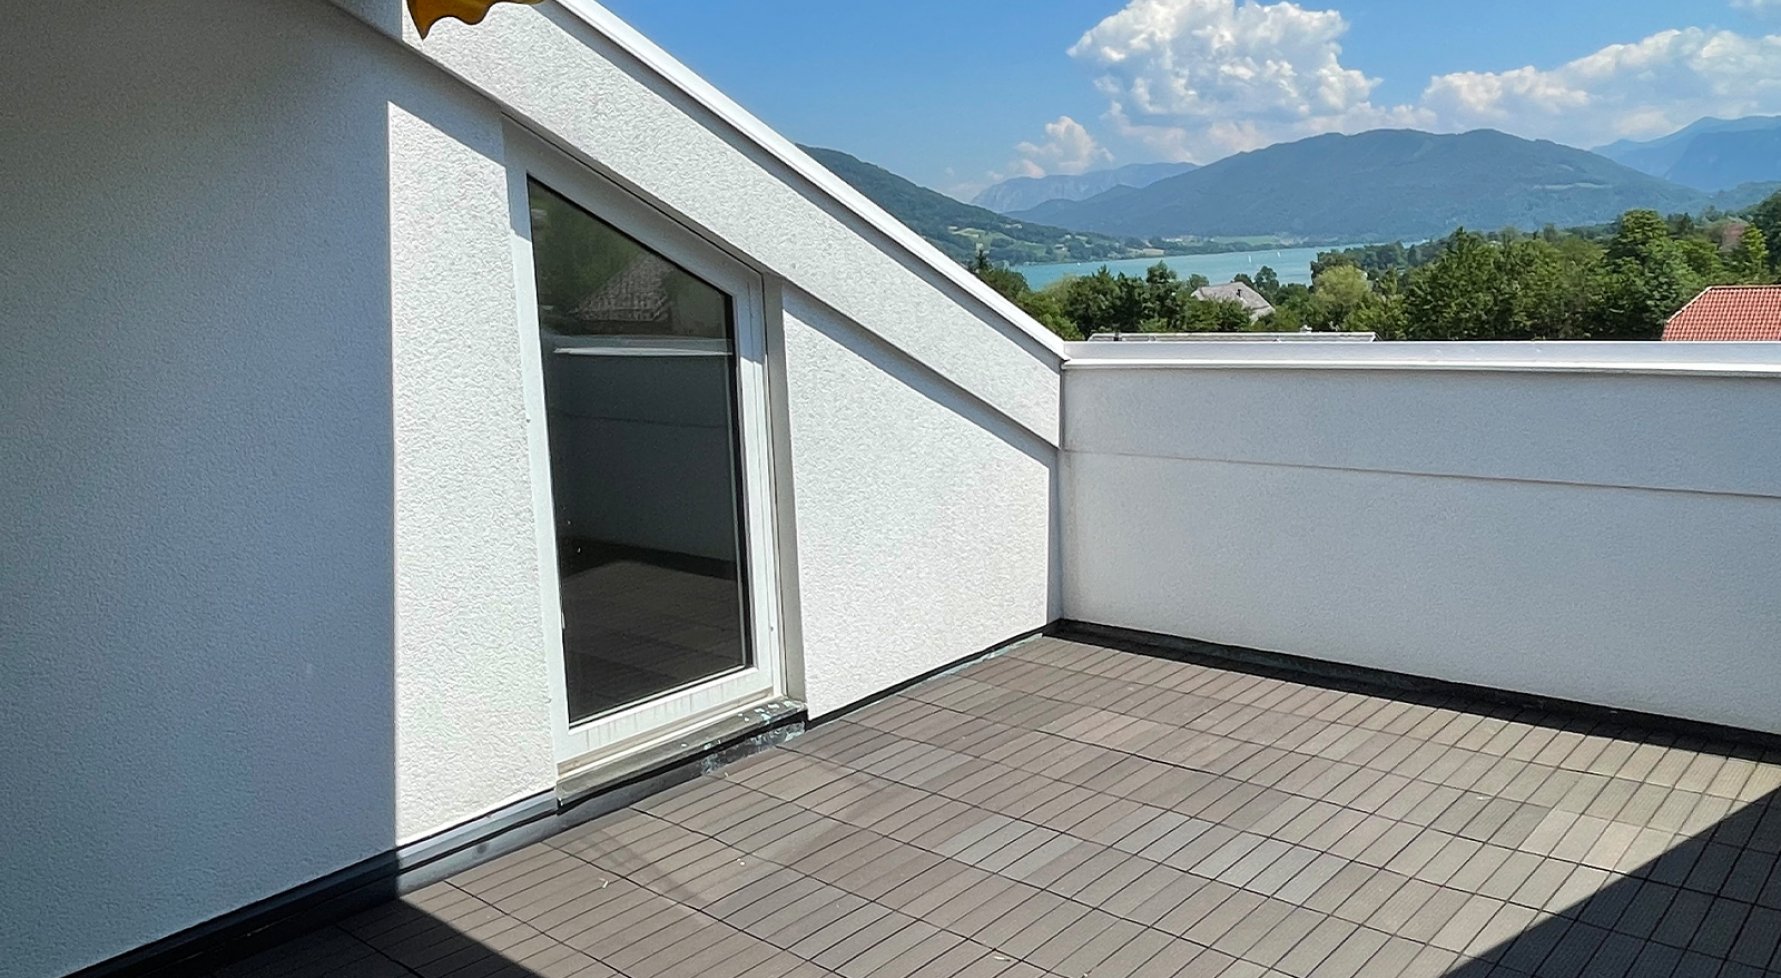 Property in 5310 Salzkammergut - Mondsee-Höribach: Penthouse maisonette with second-home designation close to the lake! - picture 1